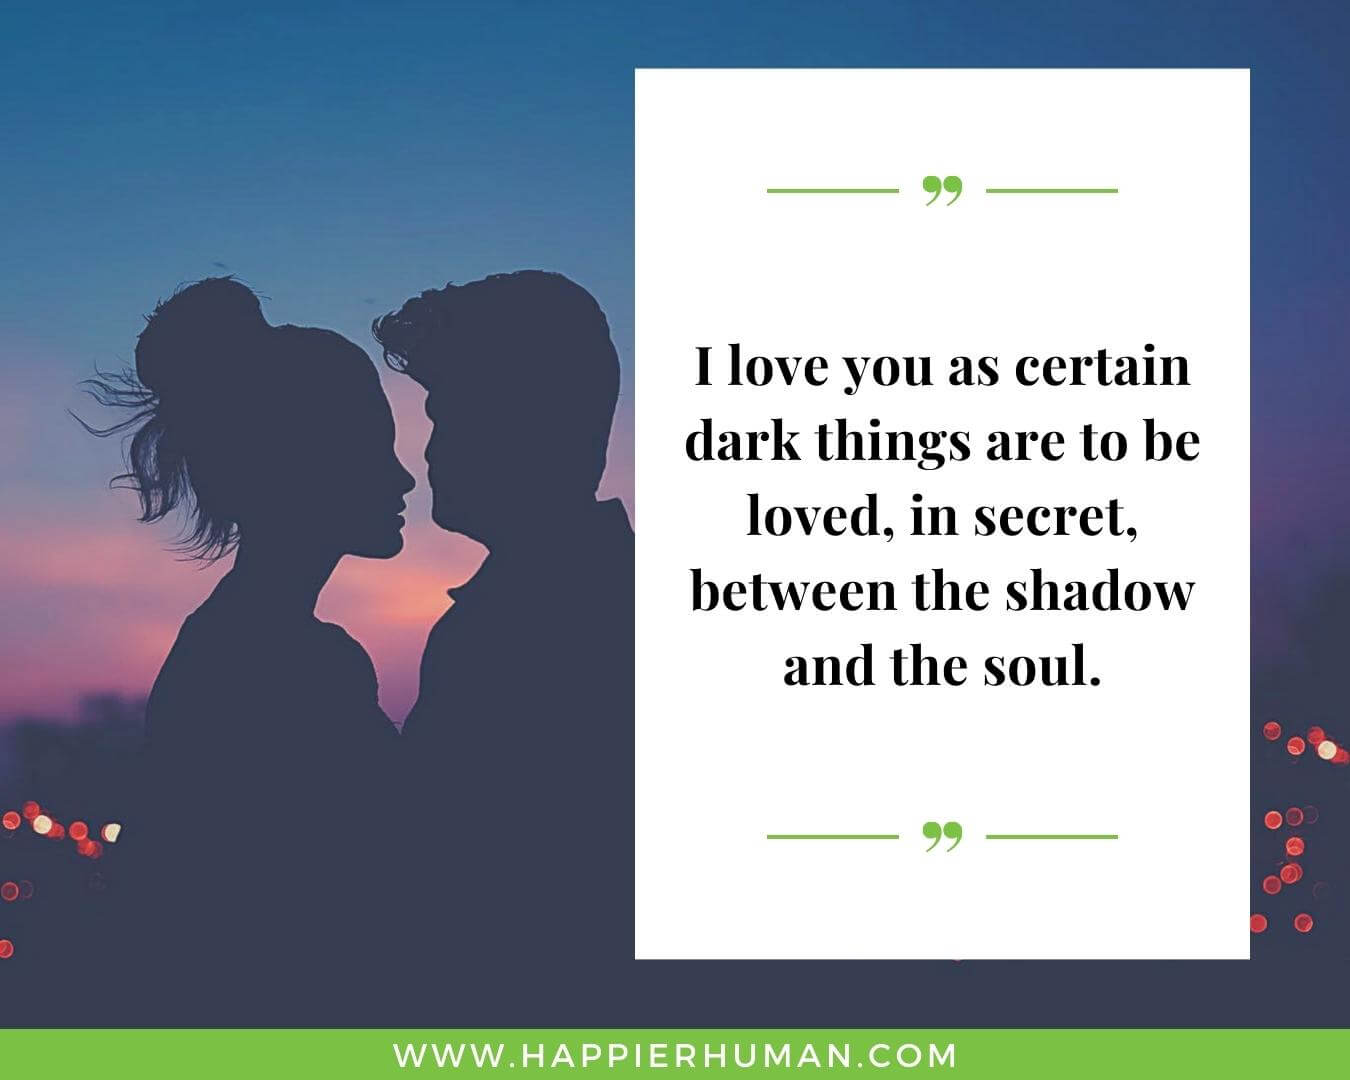 Unconditional Love Quotes for Her - “I love you as certain dark things are to be loved, in secret, between the shadow and the soul.”